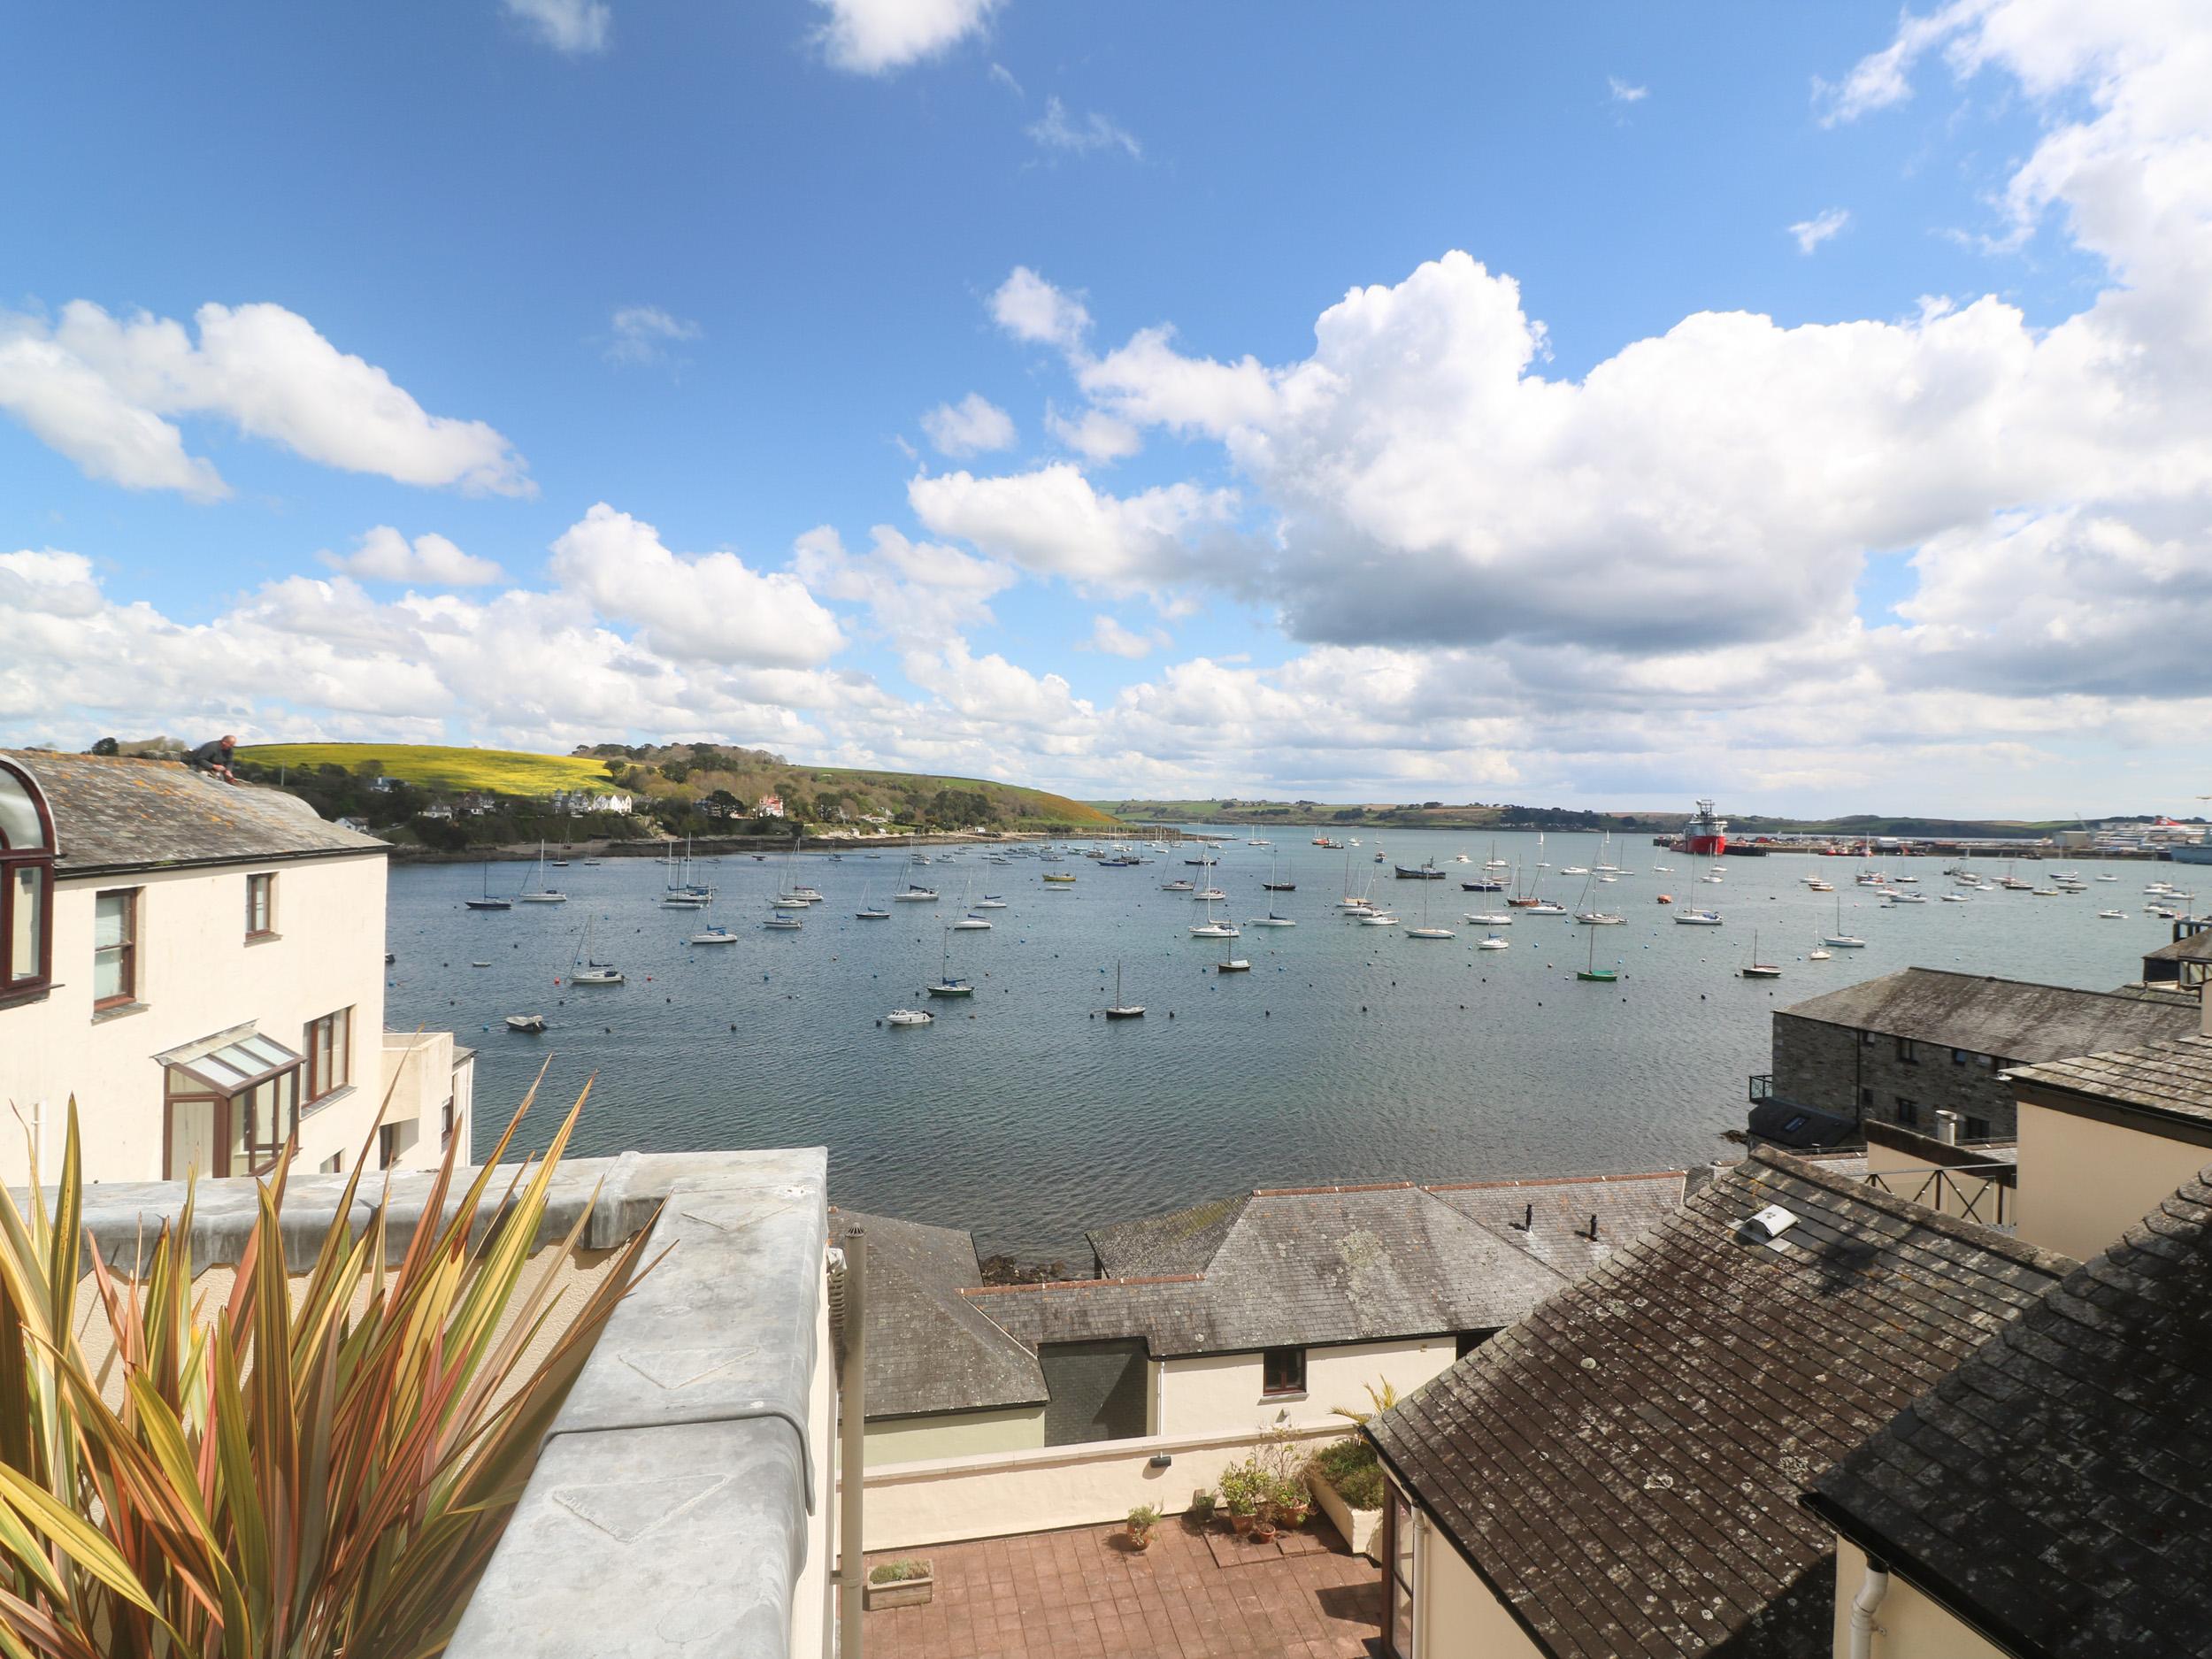 Holiday Cottage Reviews for 58 High Street - Self Catering Property in Falmouth, Cornwall Inc Scilly